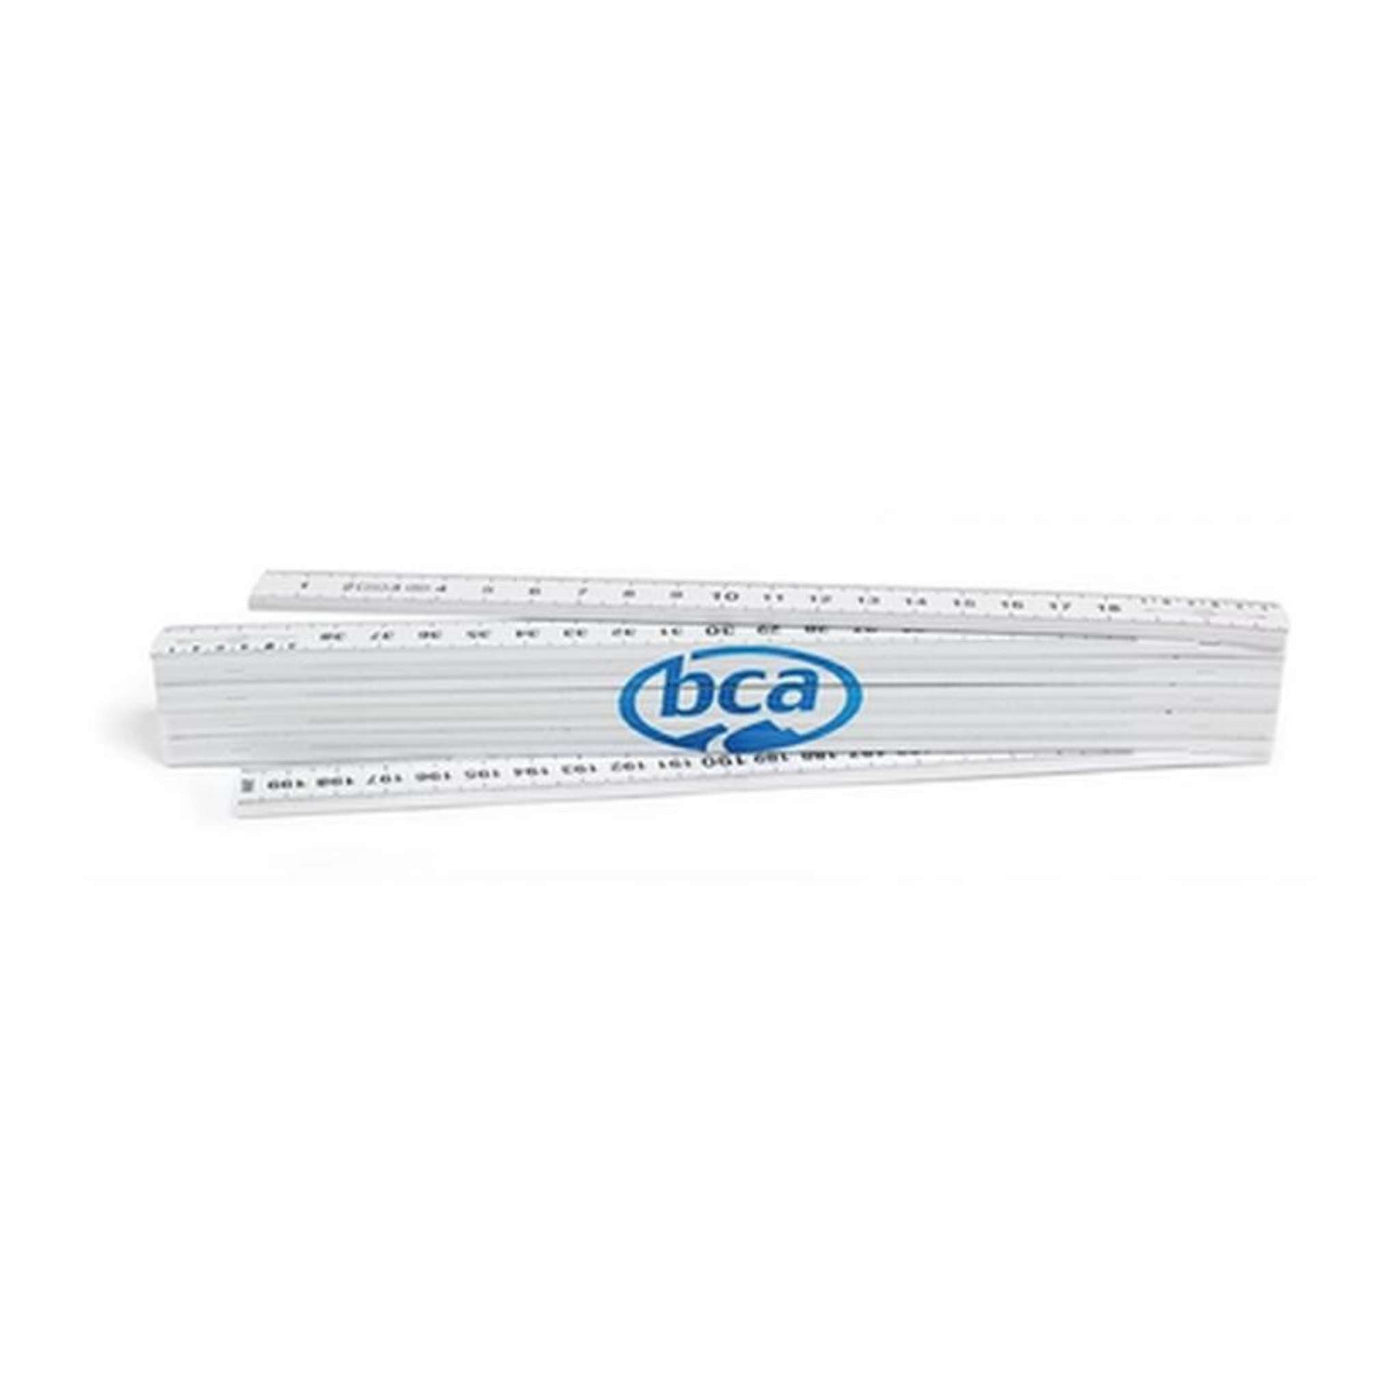 Backcountry Access 2 Meter Ruler | Backcountry Snow Safety Tool NZ | Further Faster Christchurch NZ